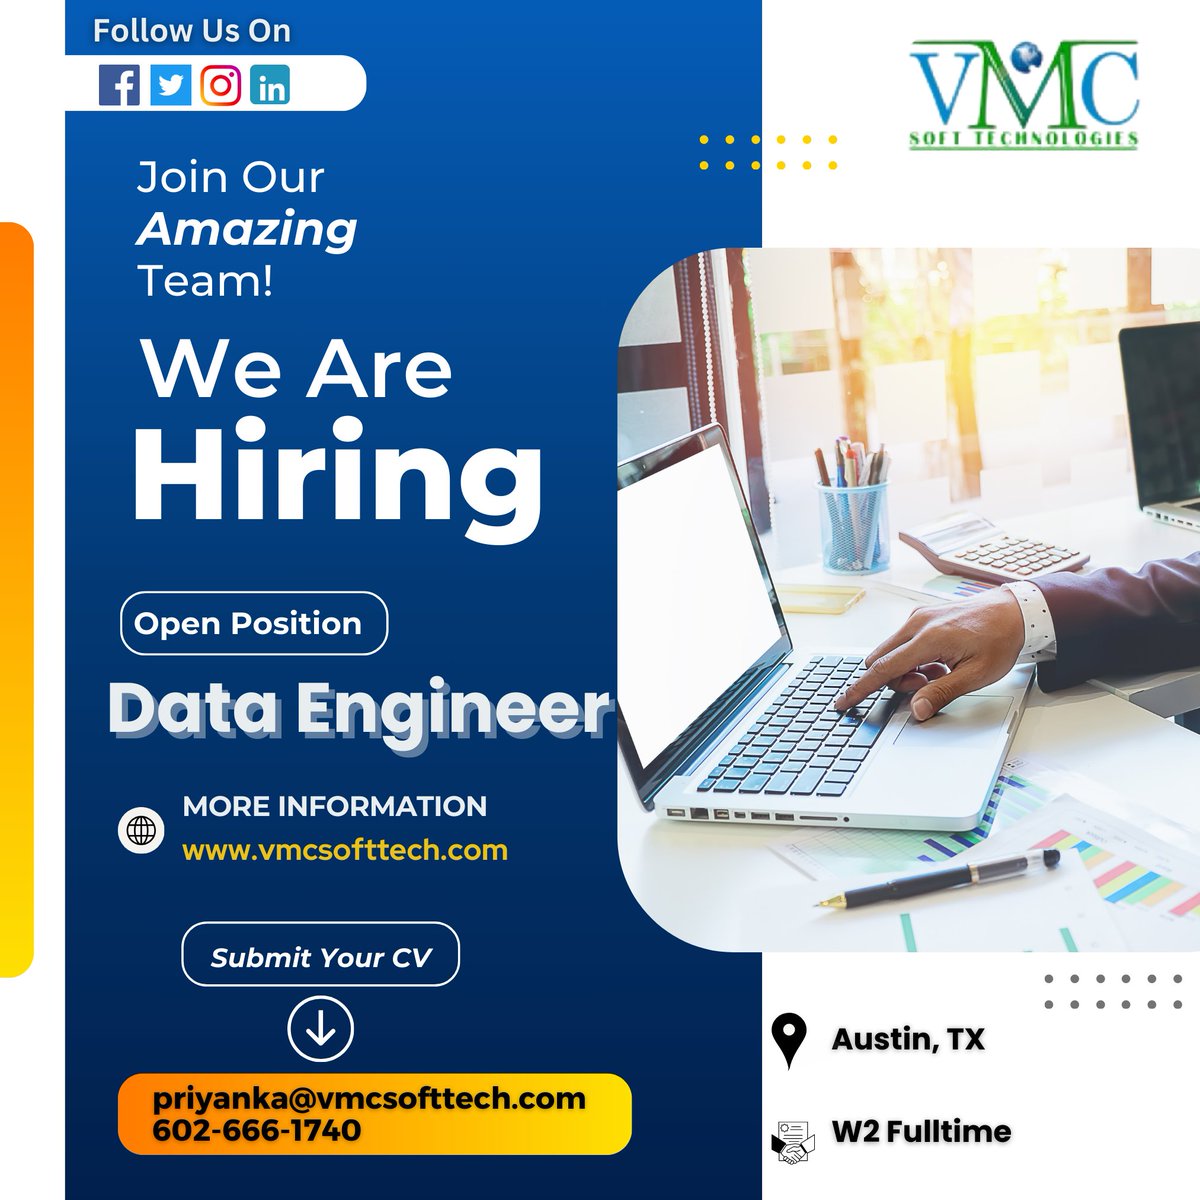 VMC Soft Technologies looking for a Data Engineer in Austin,TX

Job Title: Data Engineer
Locations: Austin , TX
Contract: W2 Full-Time

For more details: priyanka@vmcsofttech.com/ 602-666-1740

#dataengineering #datascience #bigdata #machinelearning #artificialintelligence